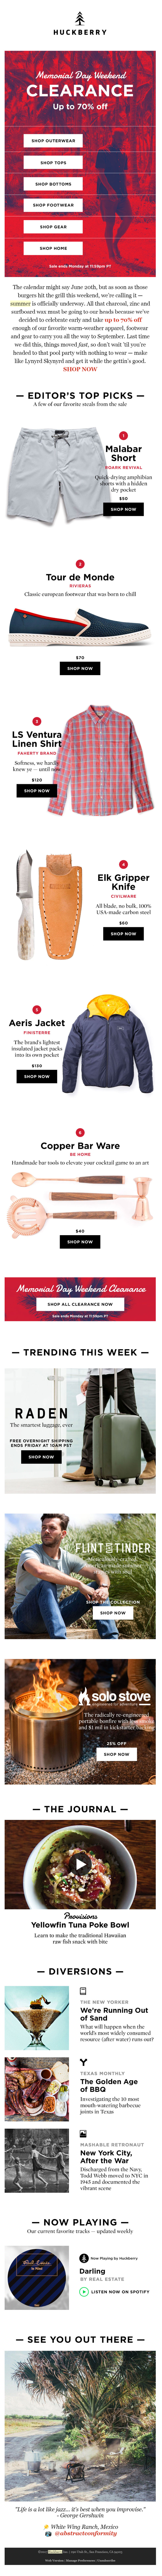 huckberry memorial day sales email